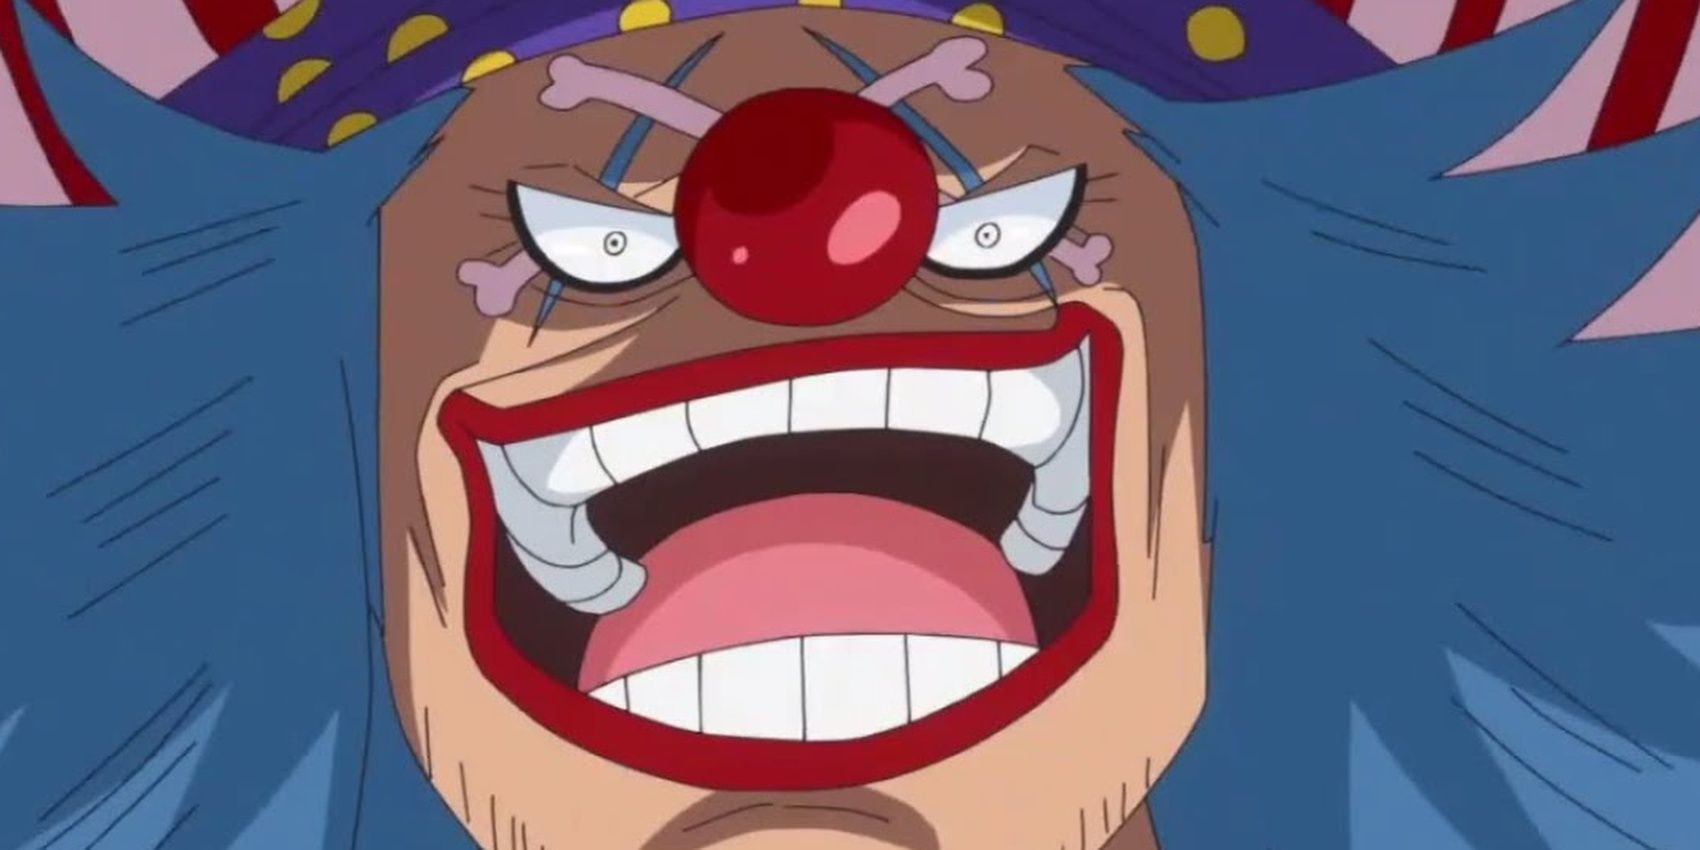 buggy the clown from the one piece anime